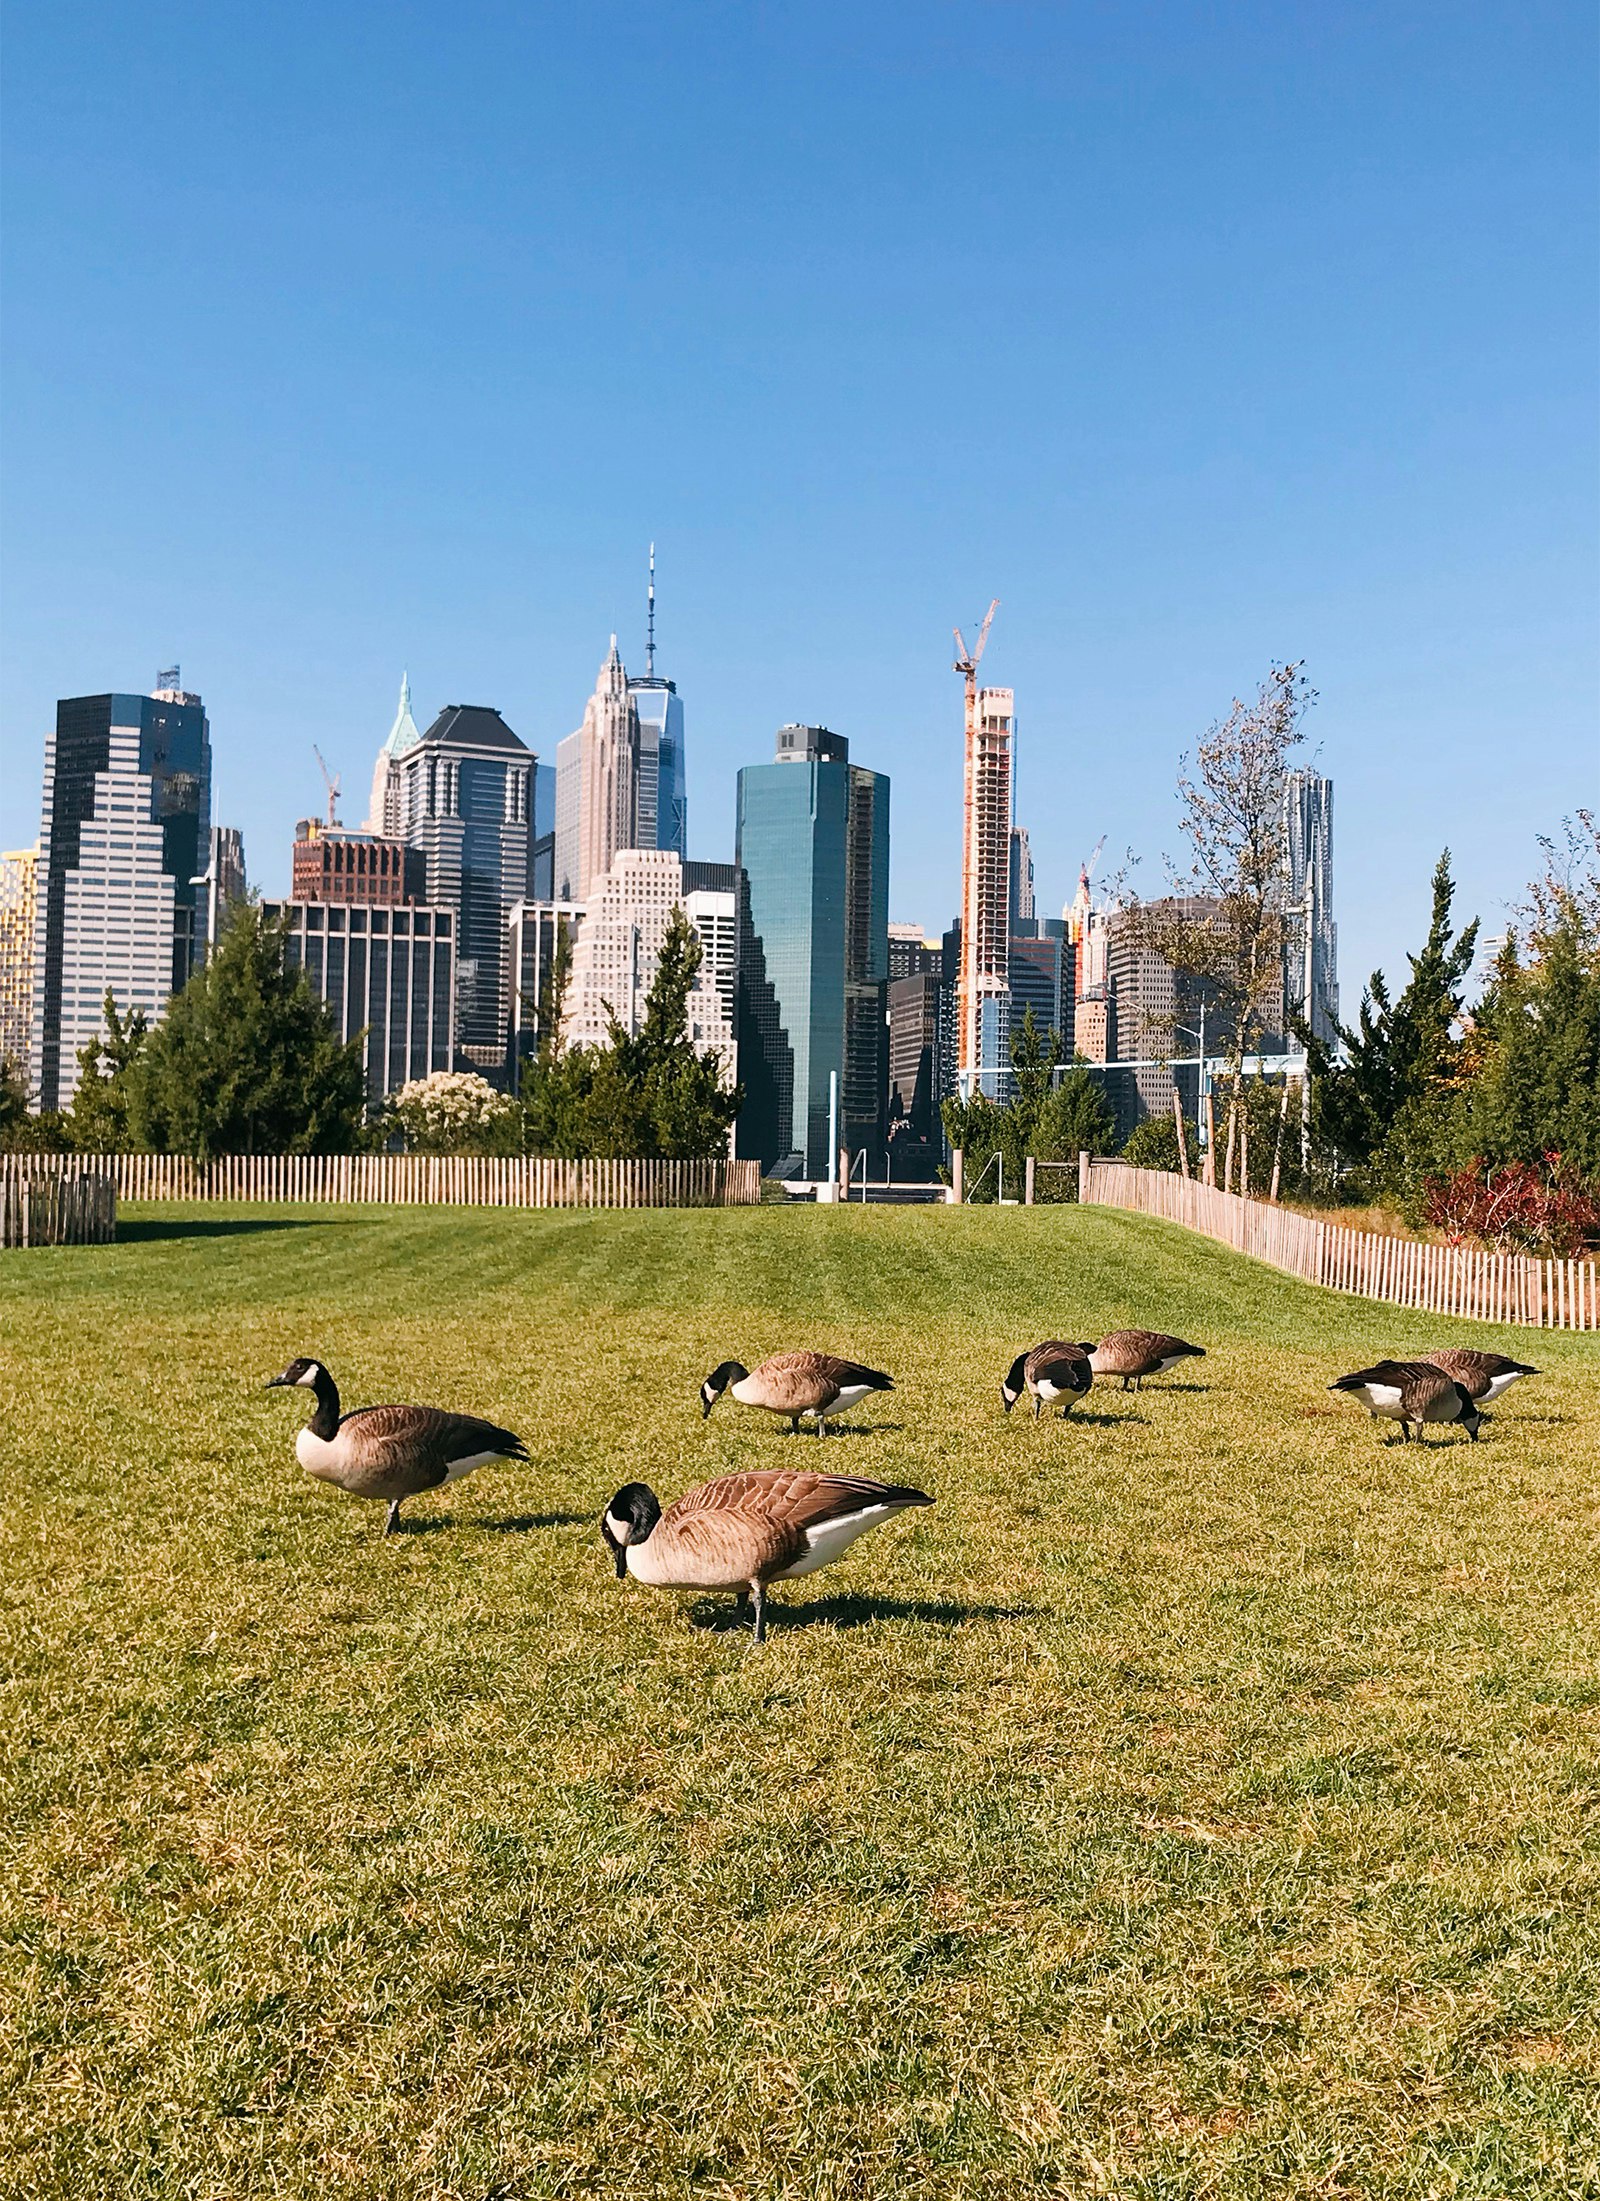 Five Canada geese walk across a green space, with skyscrapers in the distance under a blue sky in New York City